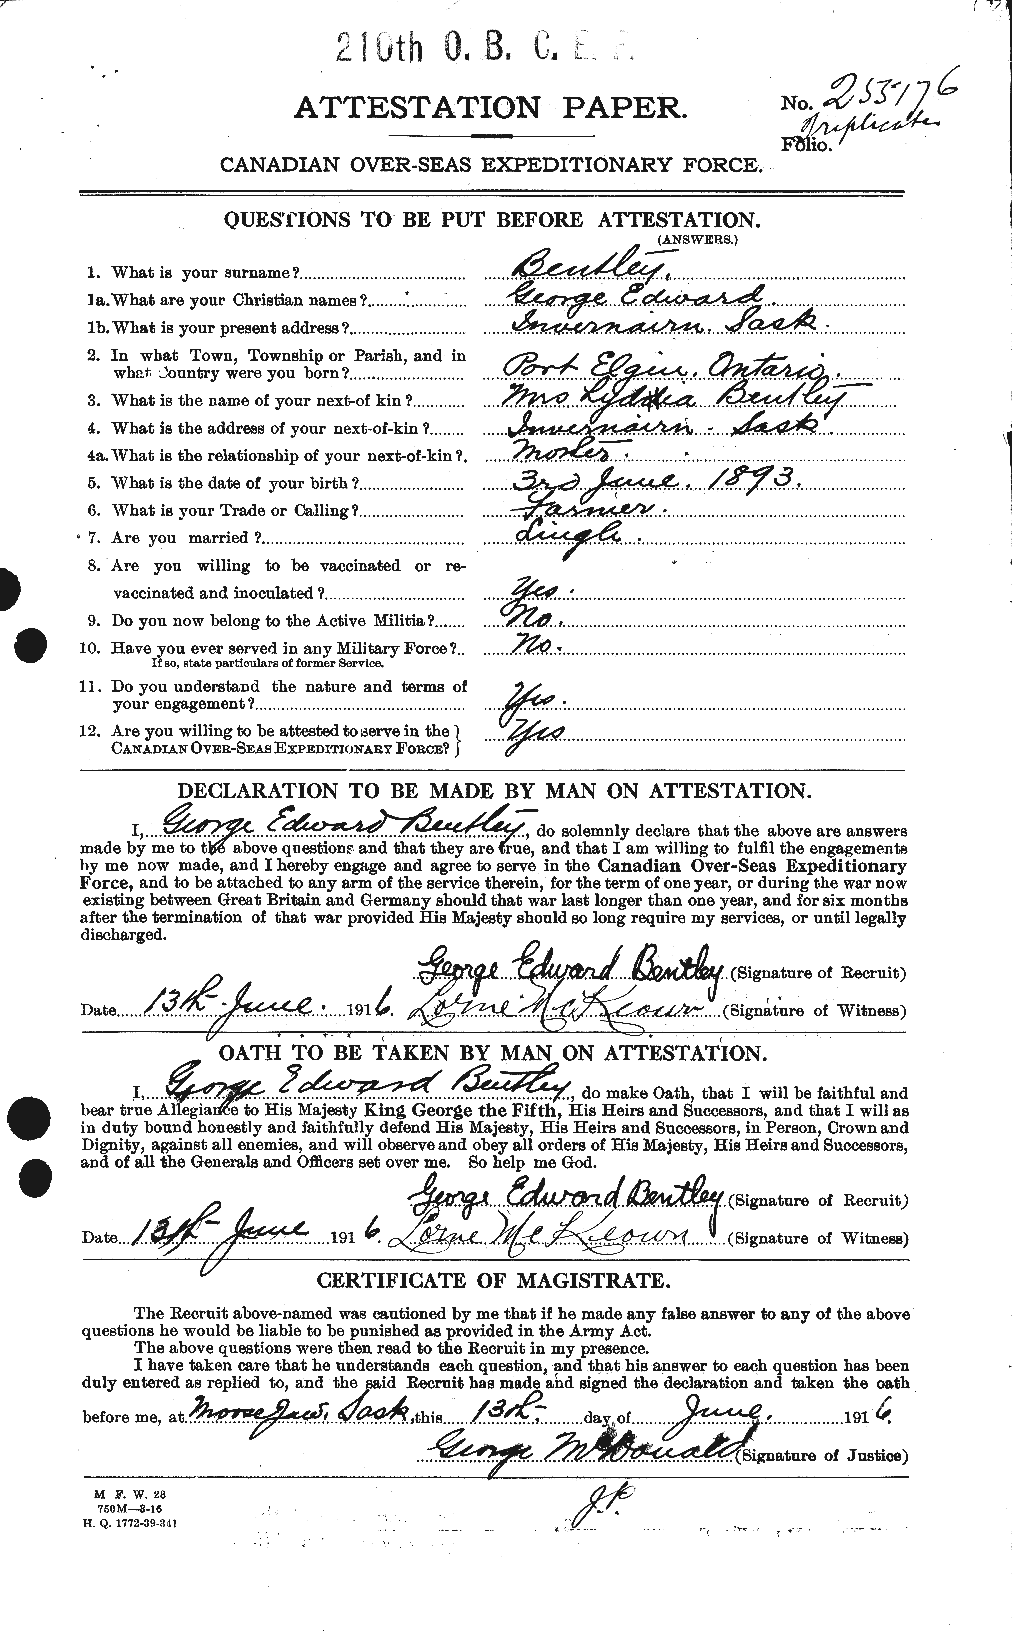 Personnel Records of the First World War - CEF 237918a